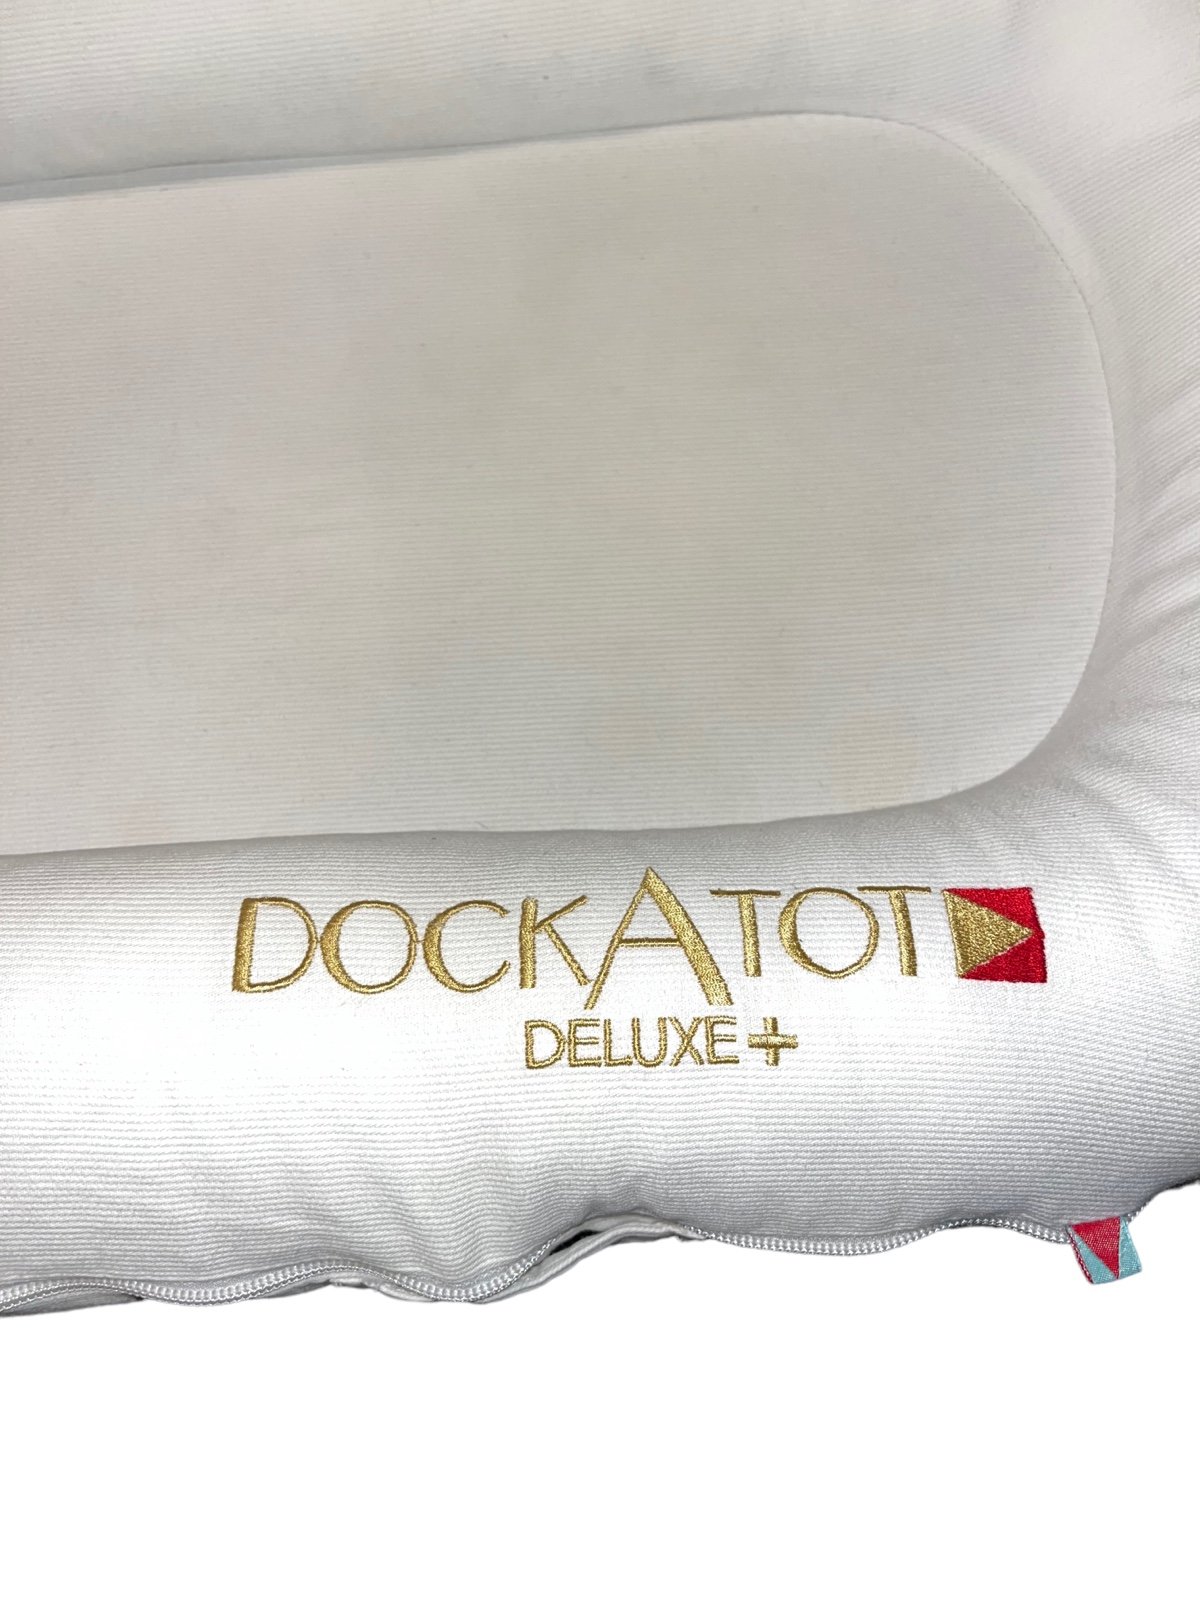 Dock a Tot Deluxe + Preowned Good Condition Infant Bed Lounger White g6fN7Llrd